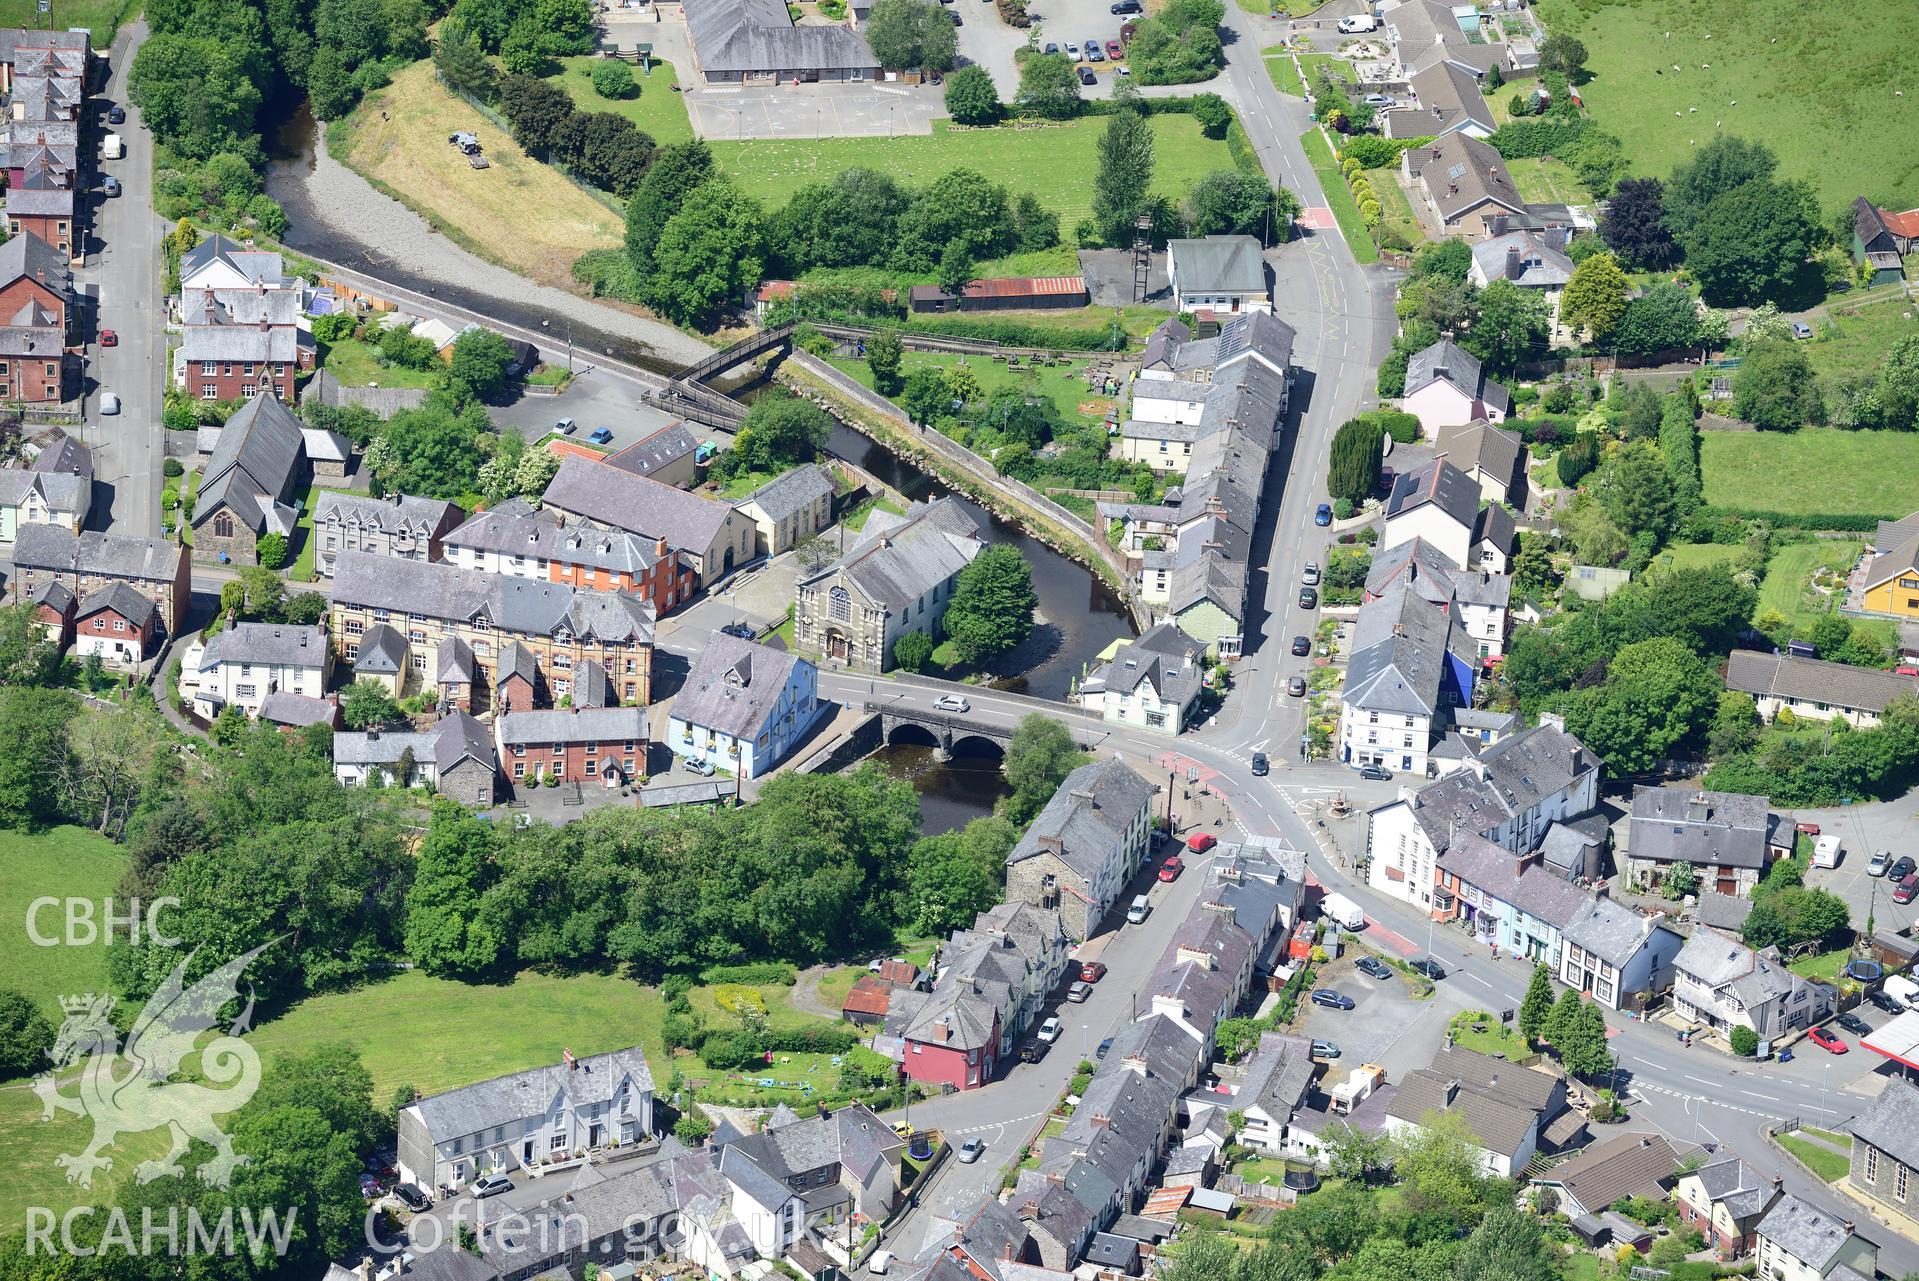 Bethesda Welsh Calvinistic Methodist chapel and St. James' church, Llanwrtyd Wells. Oblique aerial photograph taken during the Royal Commission's programme of archaeological aerial reconnaissance by Toby Driver on 30th June 2015.